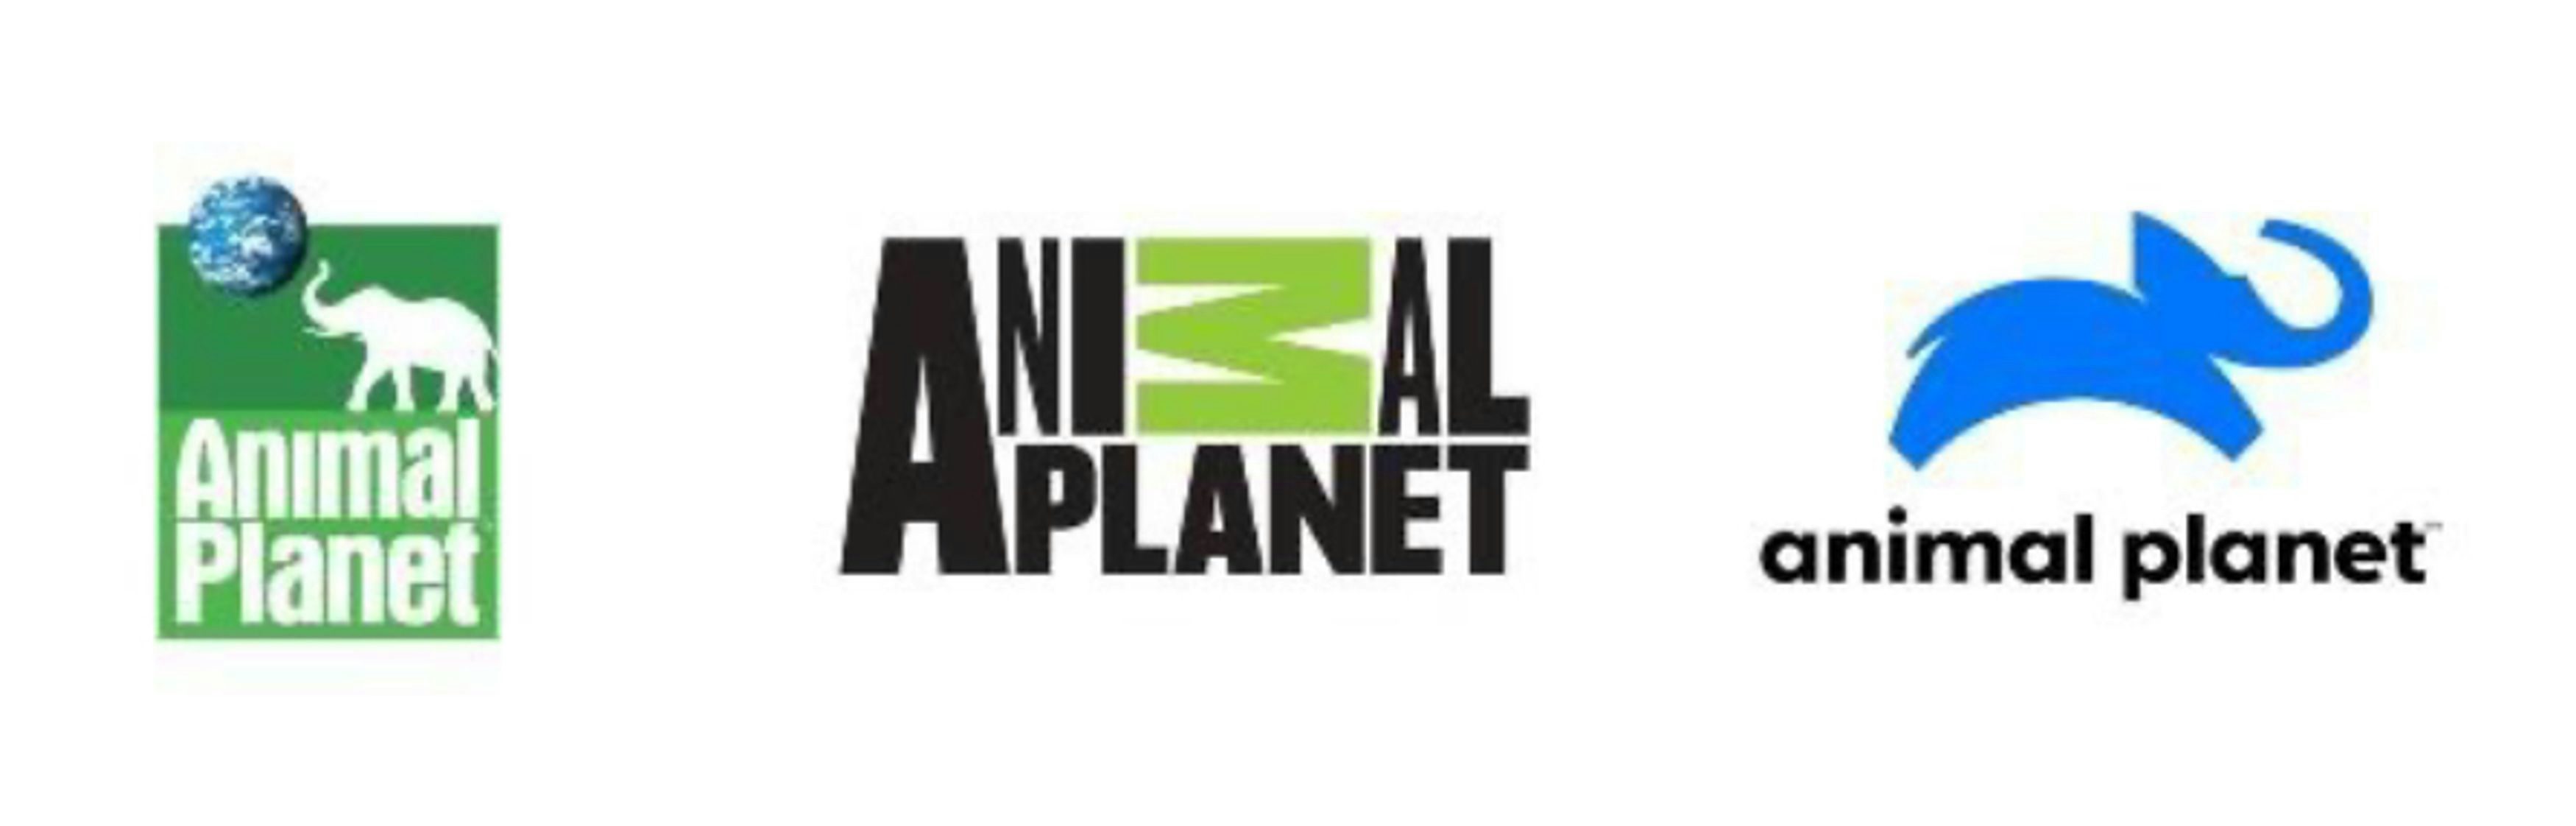 Three different logos of the television channel Animal Planet, showing the evolution of the brand's design. From left to right: a logo with a globe and an elephant silhouette on a green background, a stylised black and green text logo, and a modern design with a blue elephant and lowercase text.